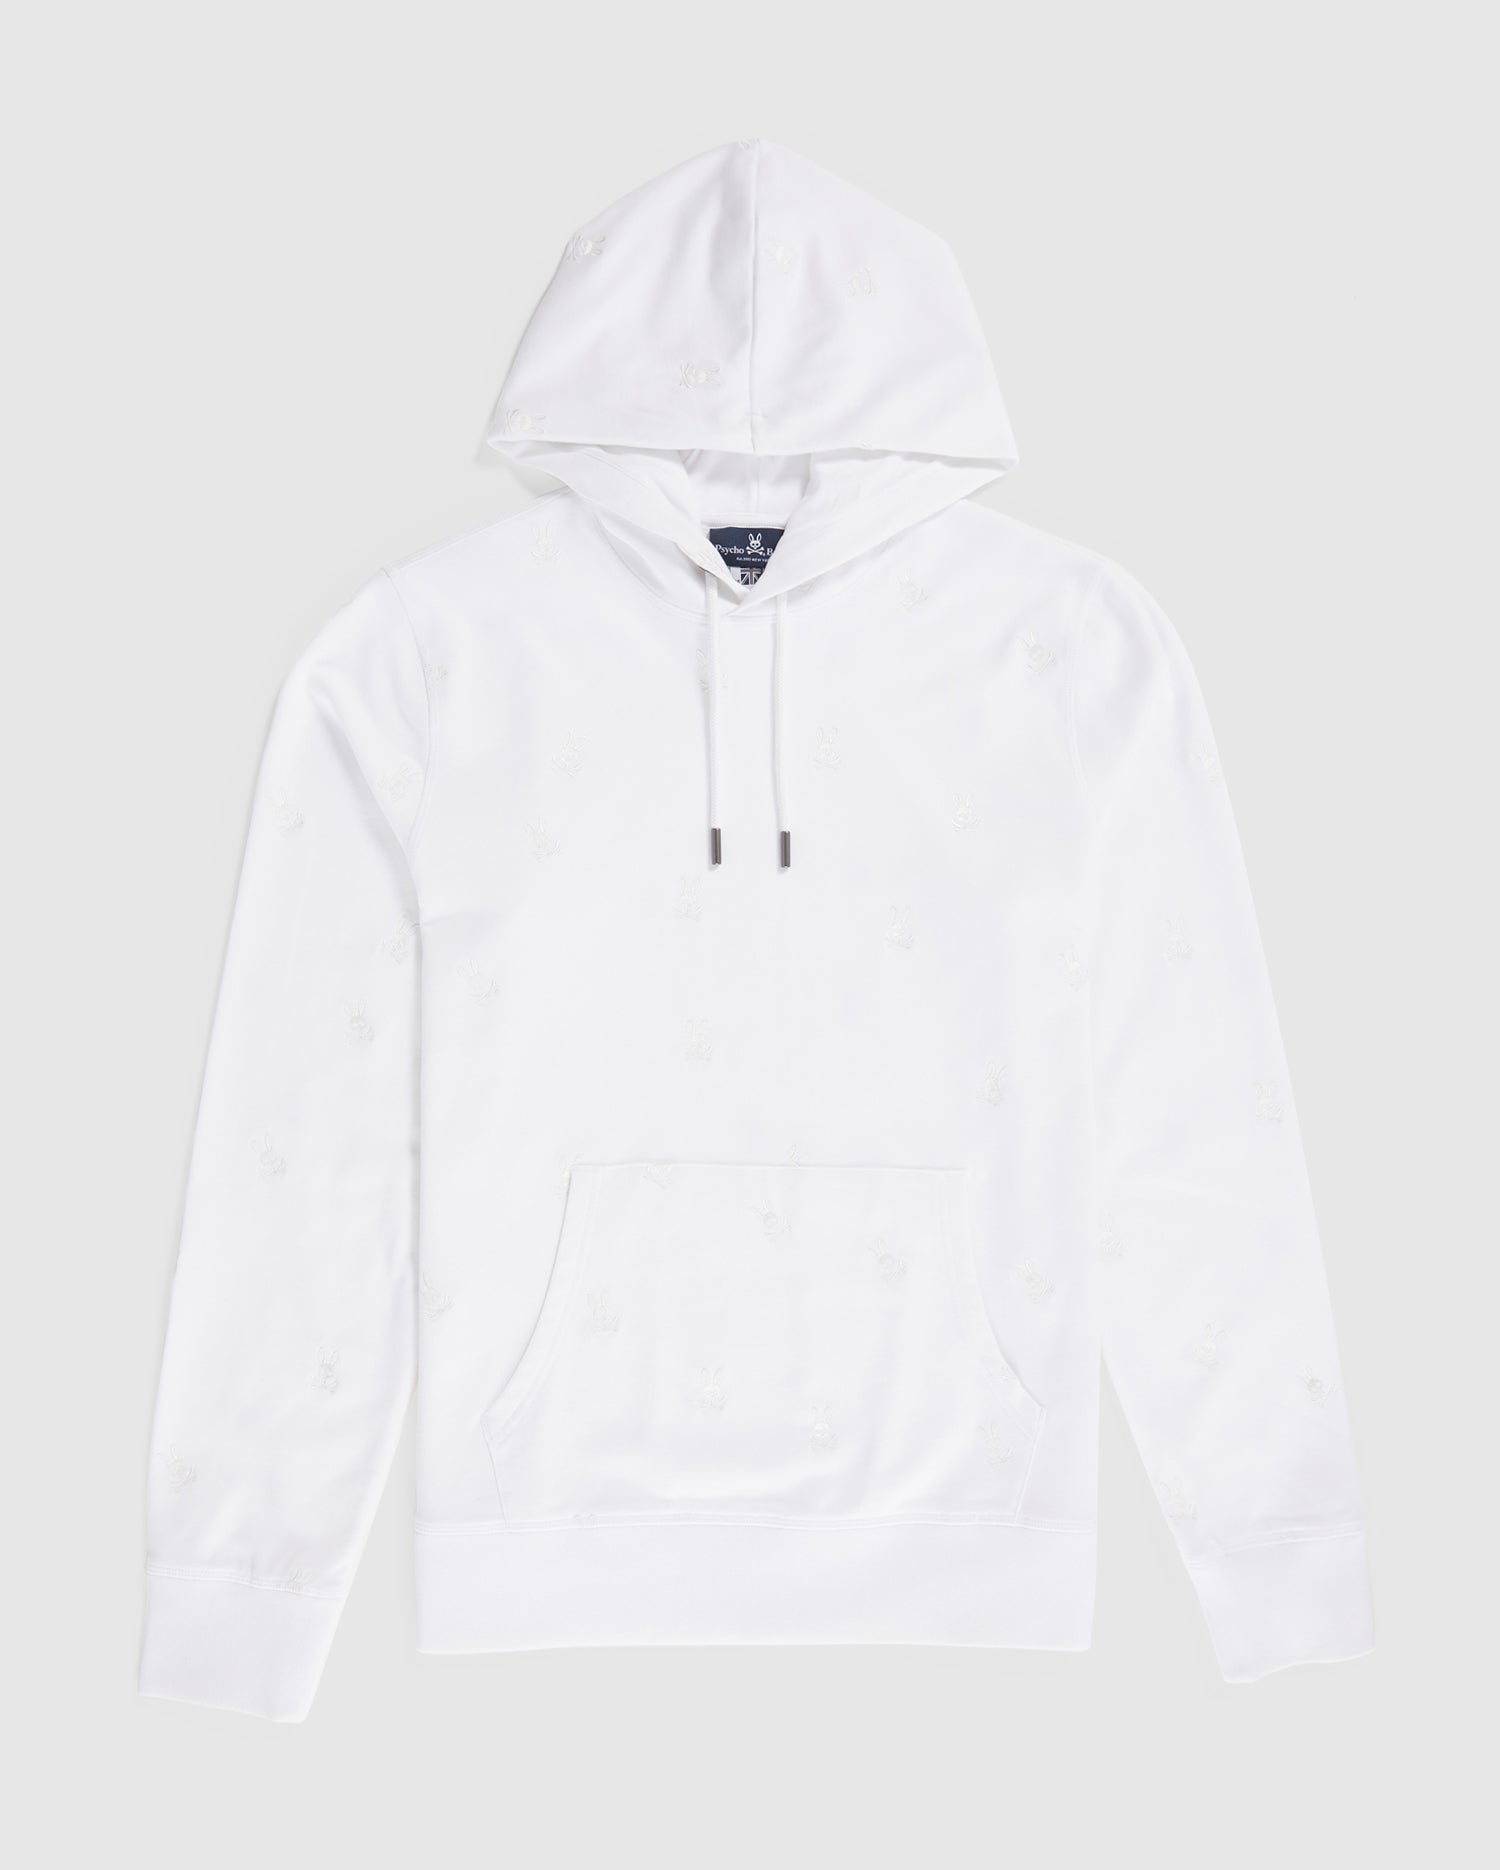 WOAD MENS POPOVER PSYCHO BUNNY EMBROIDERED | HOODIE WHITE